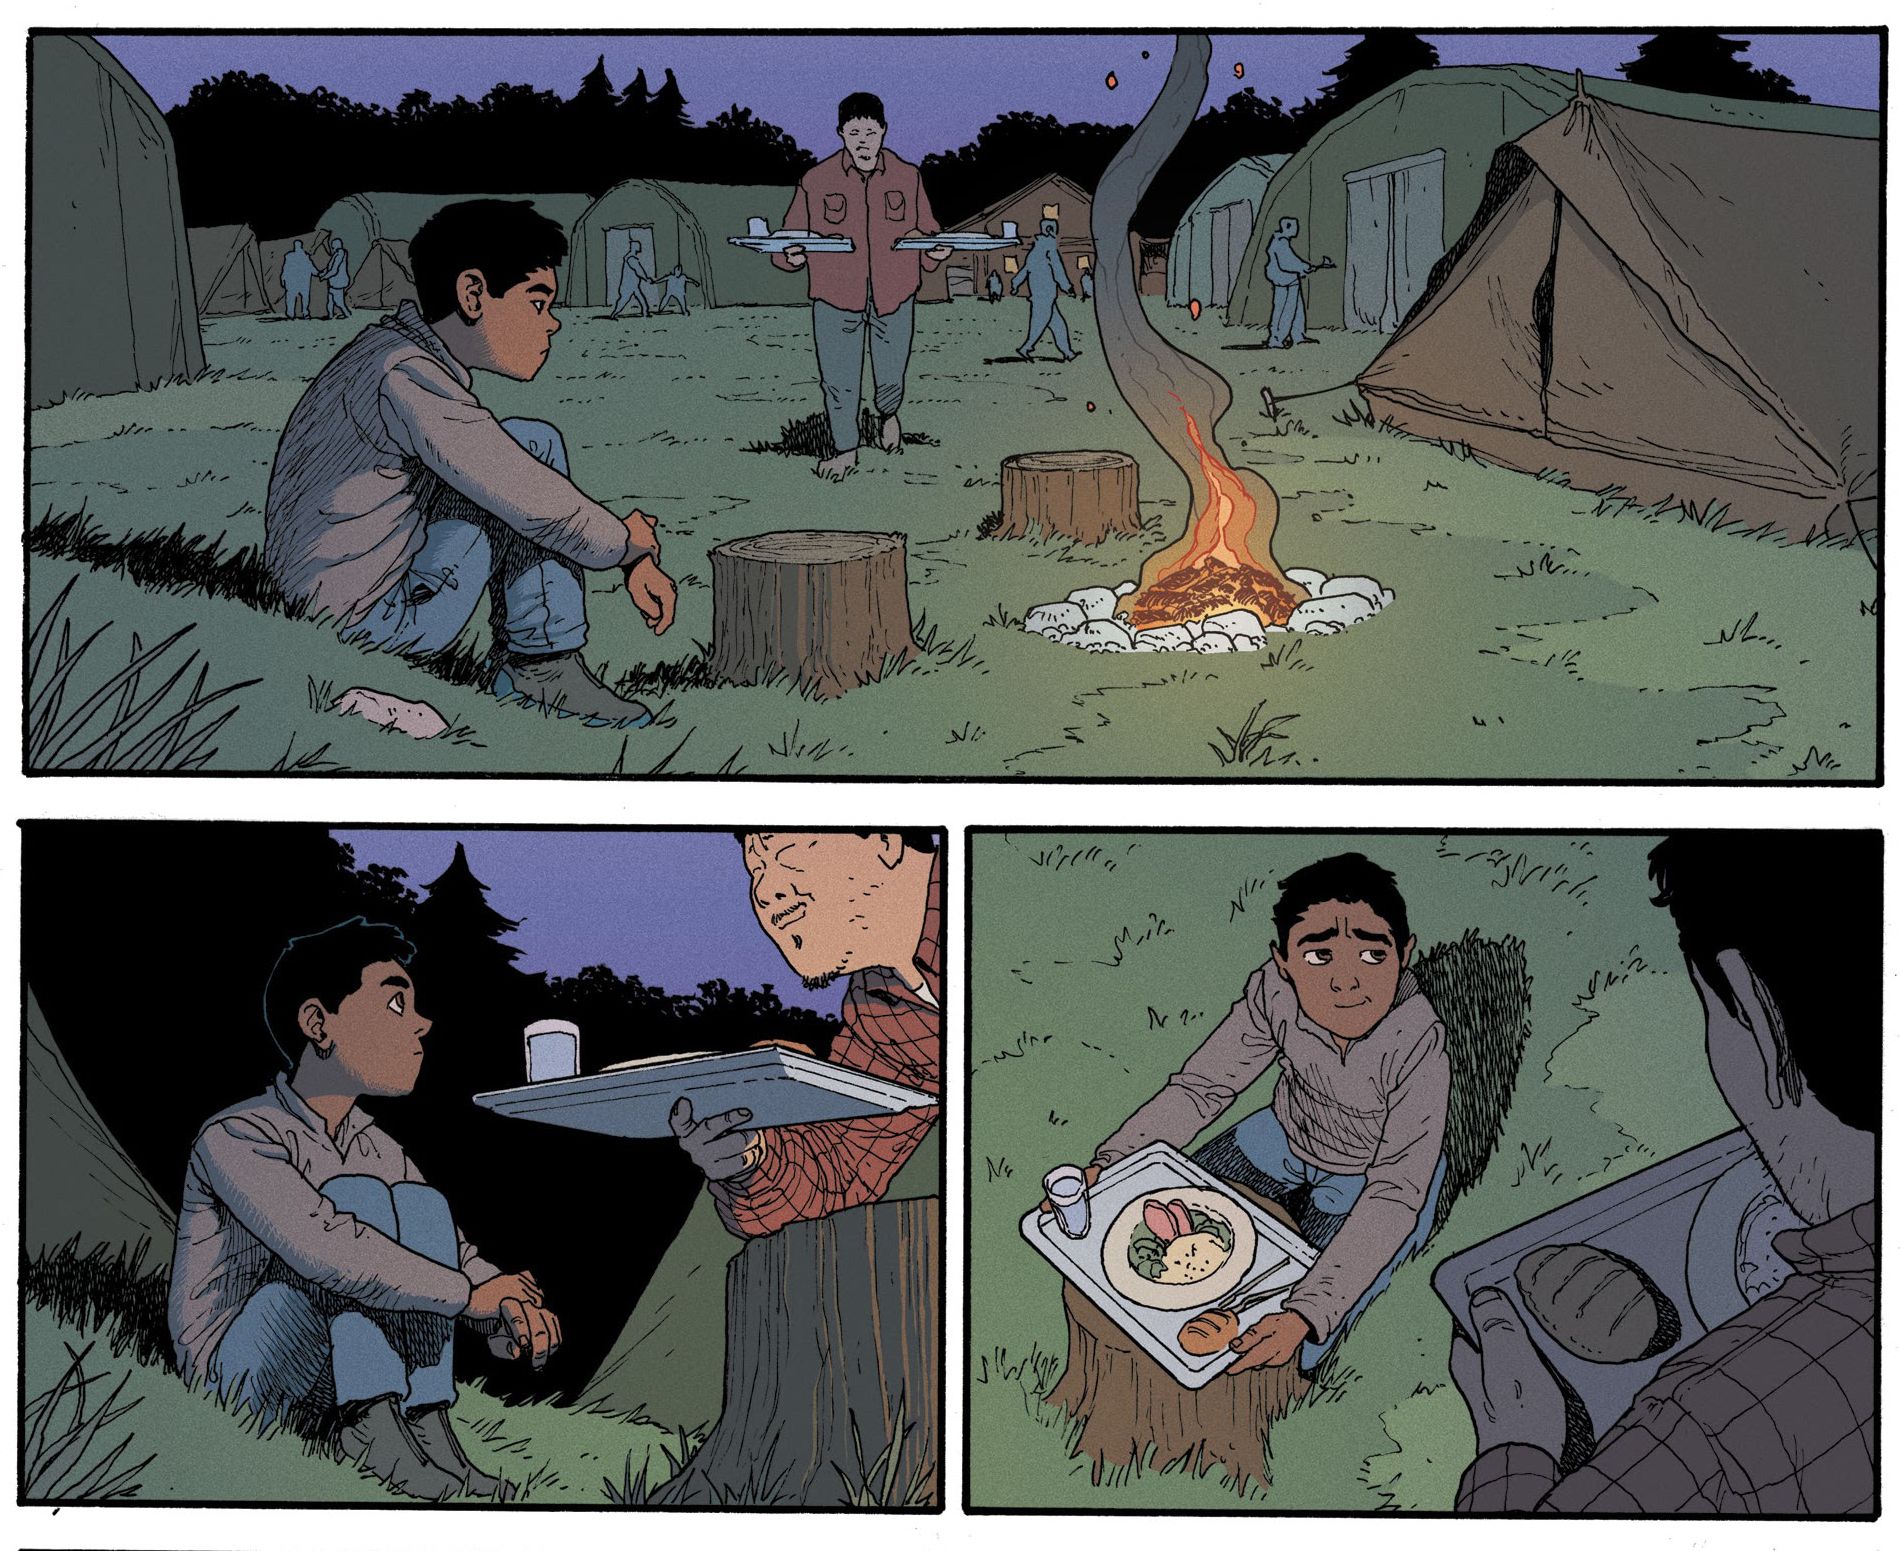 Sonny and Javier eat dinner by the campfire